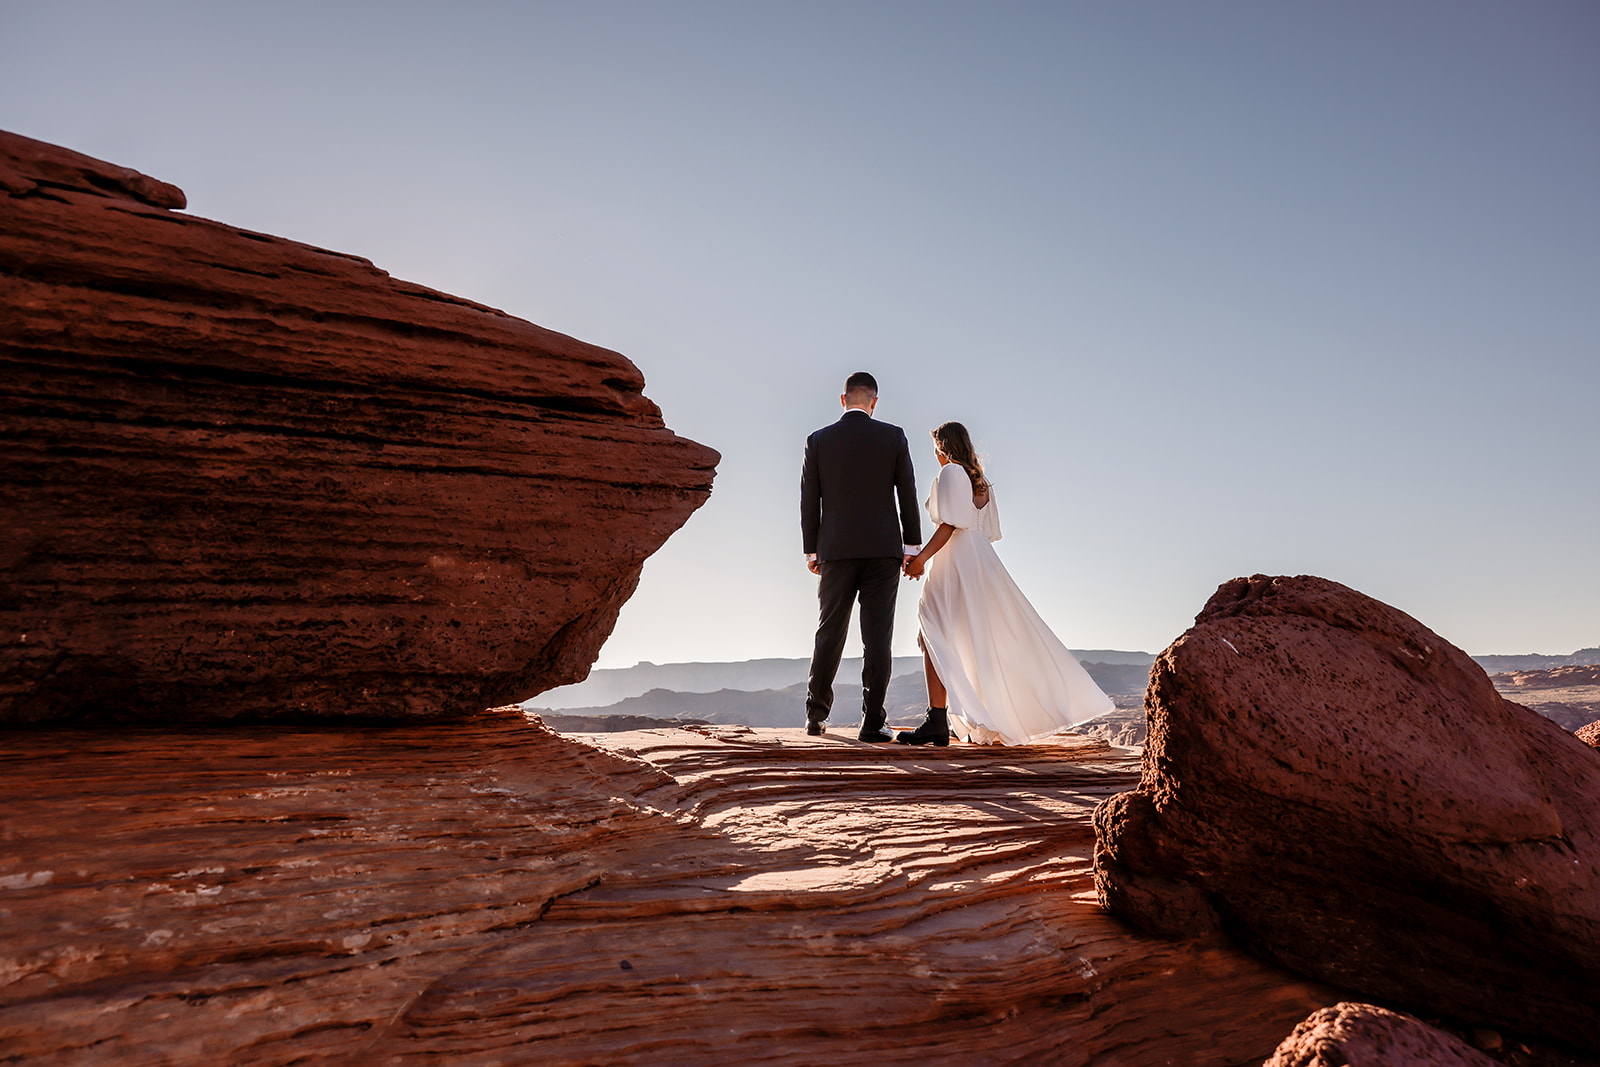 The bride wore combat boots for her wedding at Horseshoe Bend